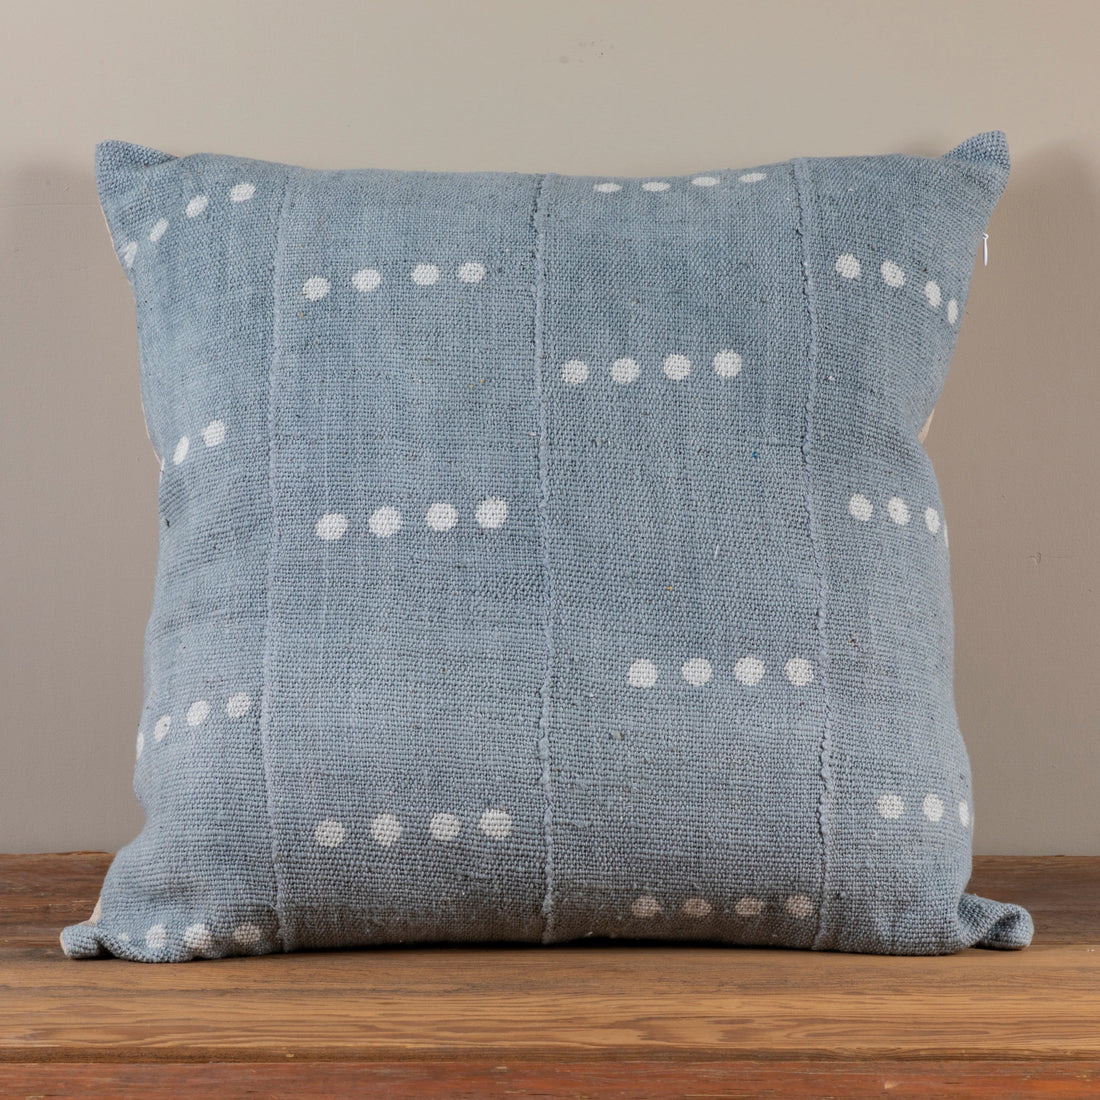 Mud Cloth Square Pillow, Blue / Grey with Dots